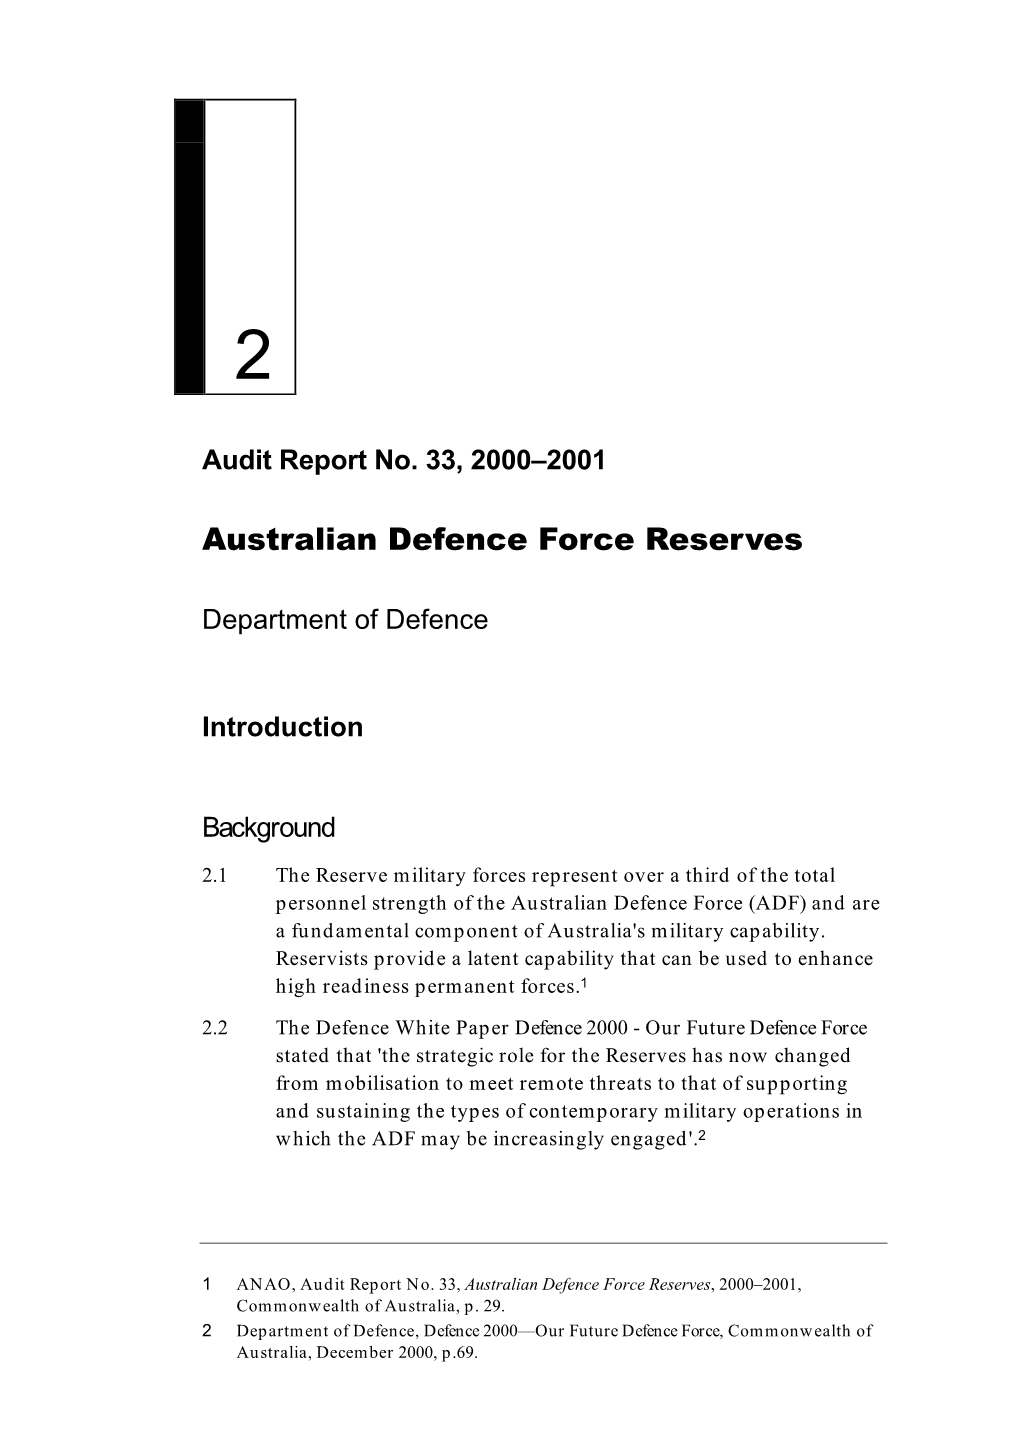 Chapter 2: Australian Defence Force Reserves